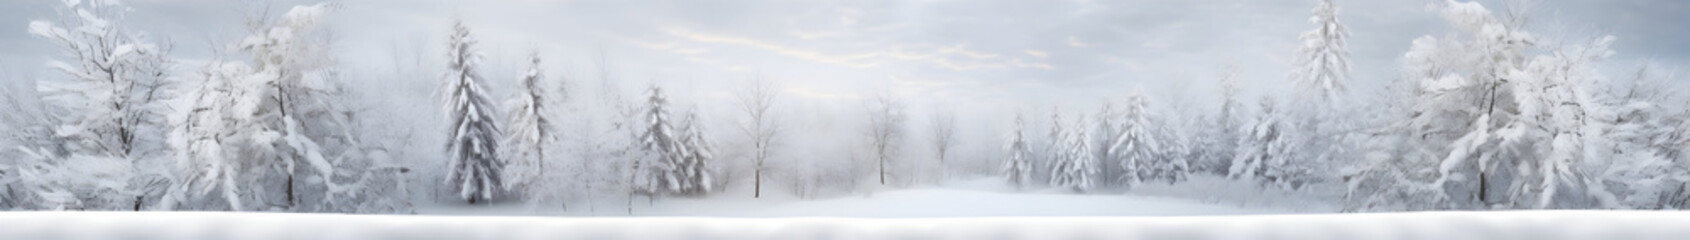 Abstract wihter forest with snowfall and snowflakes in winter. Horizontal composition.